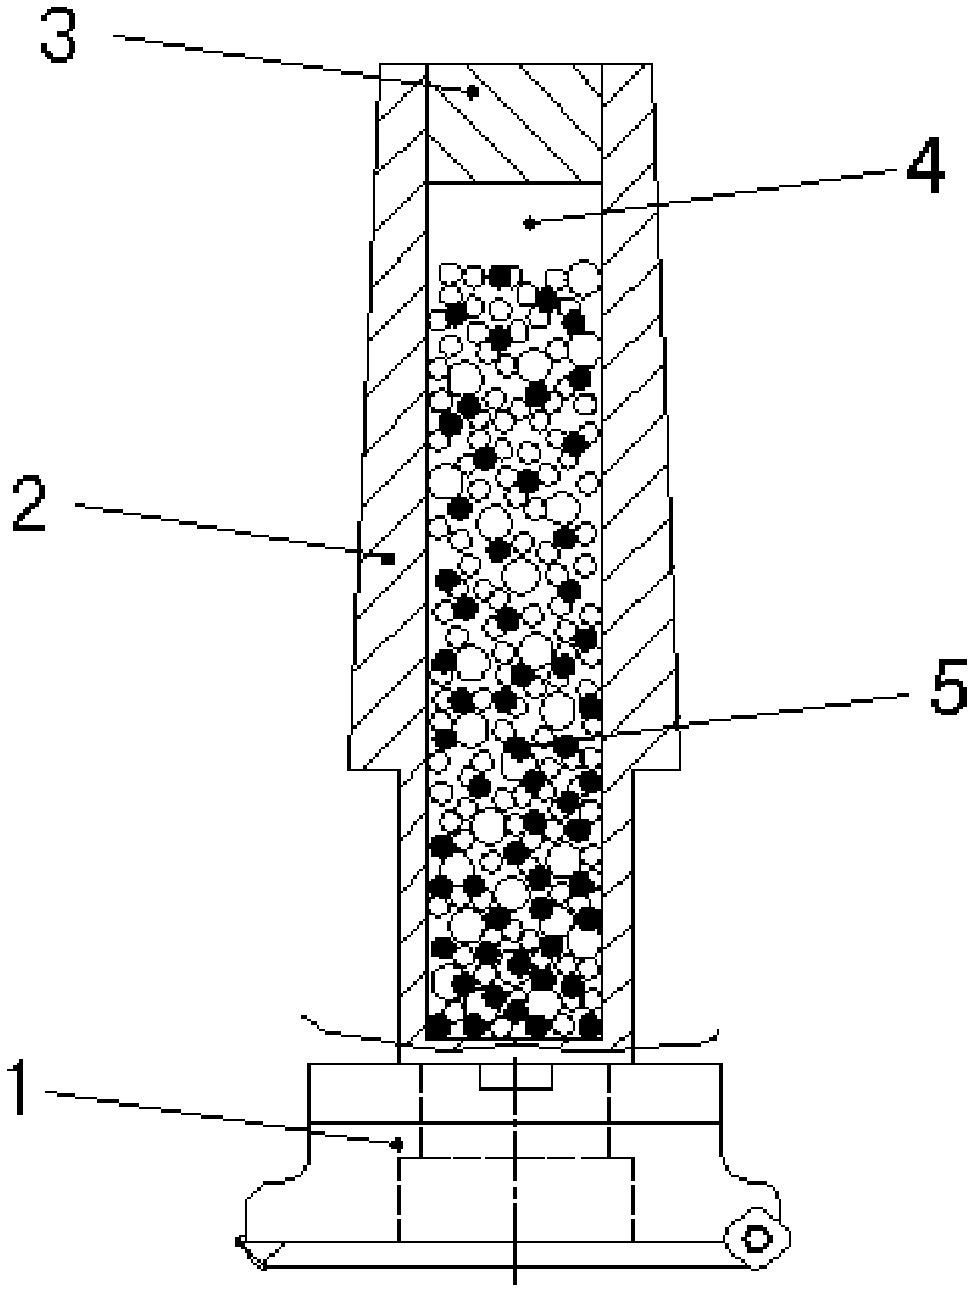 A damping and vibration-reducing tool rod